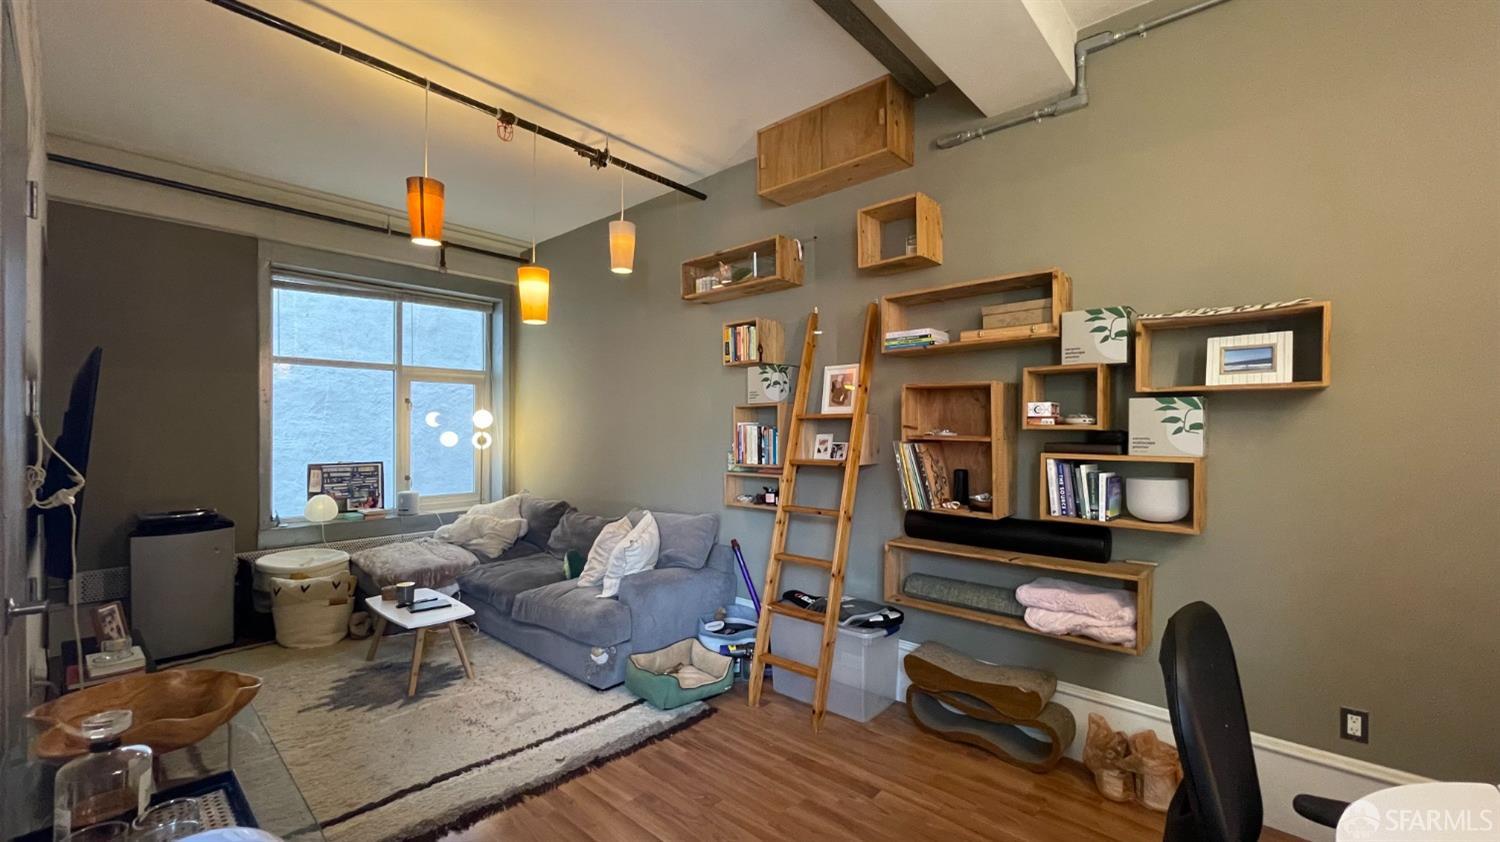 Photo of 83 Mcallister St #308 in San Francisco, CA